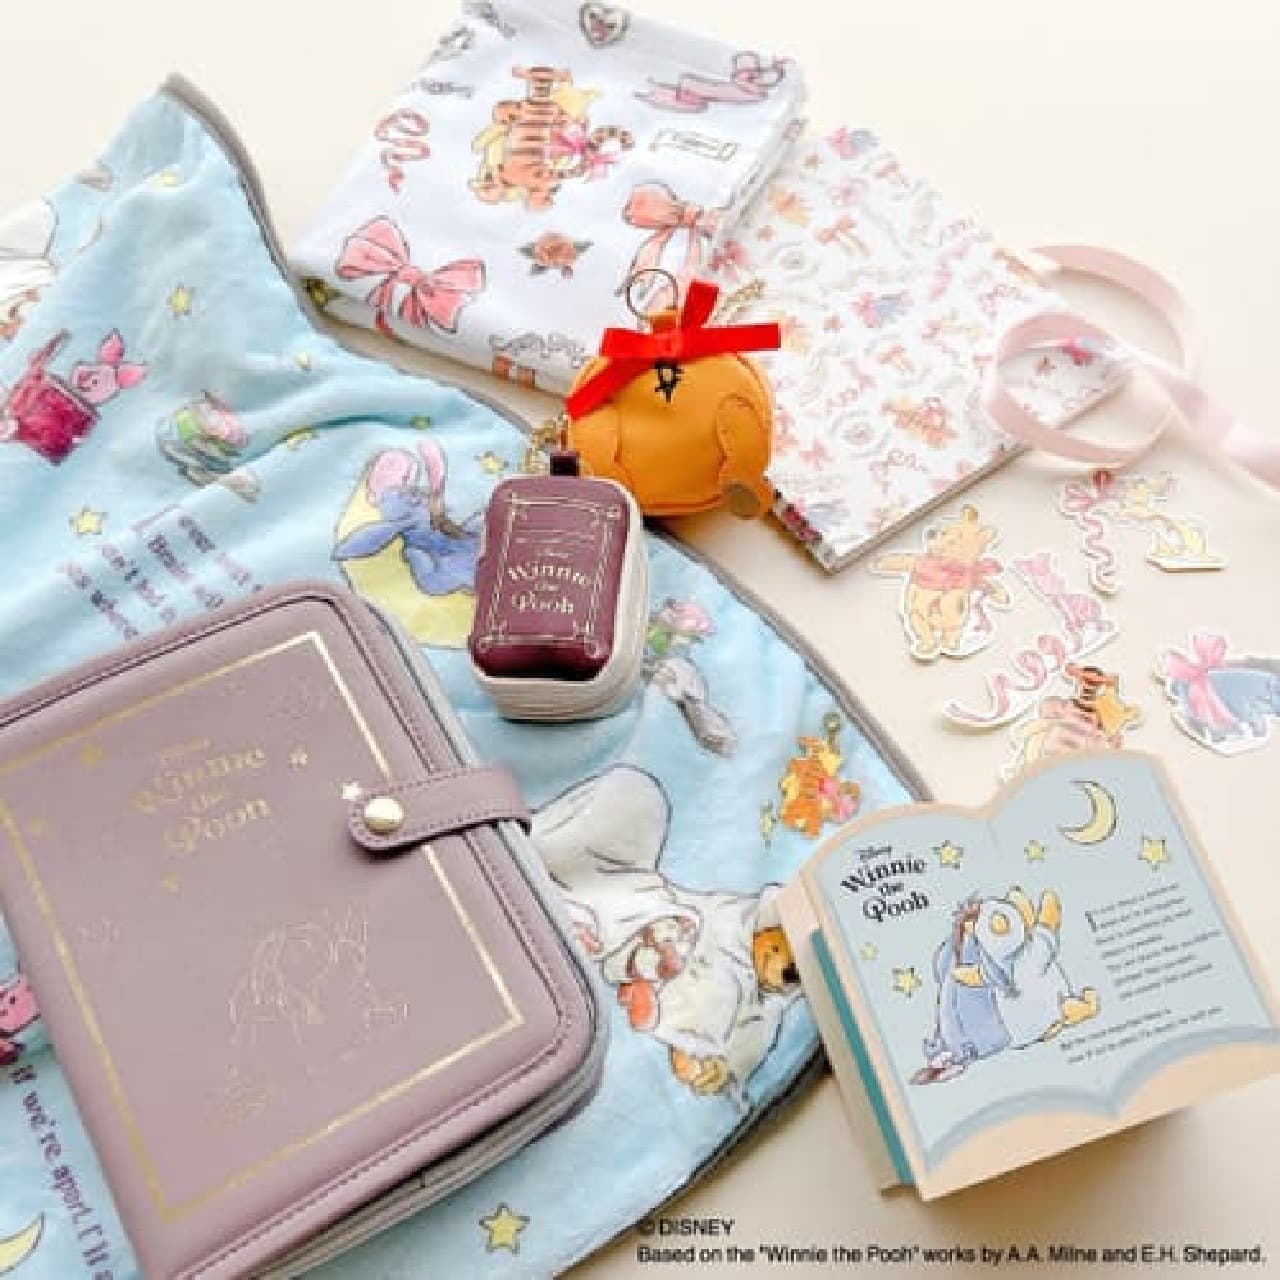 ITS’DEMO「Winnie the Pooh」デザイン商品